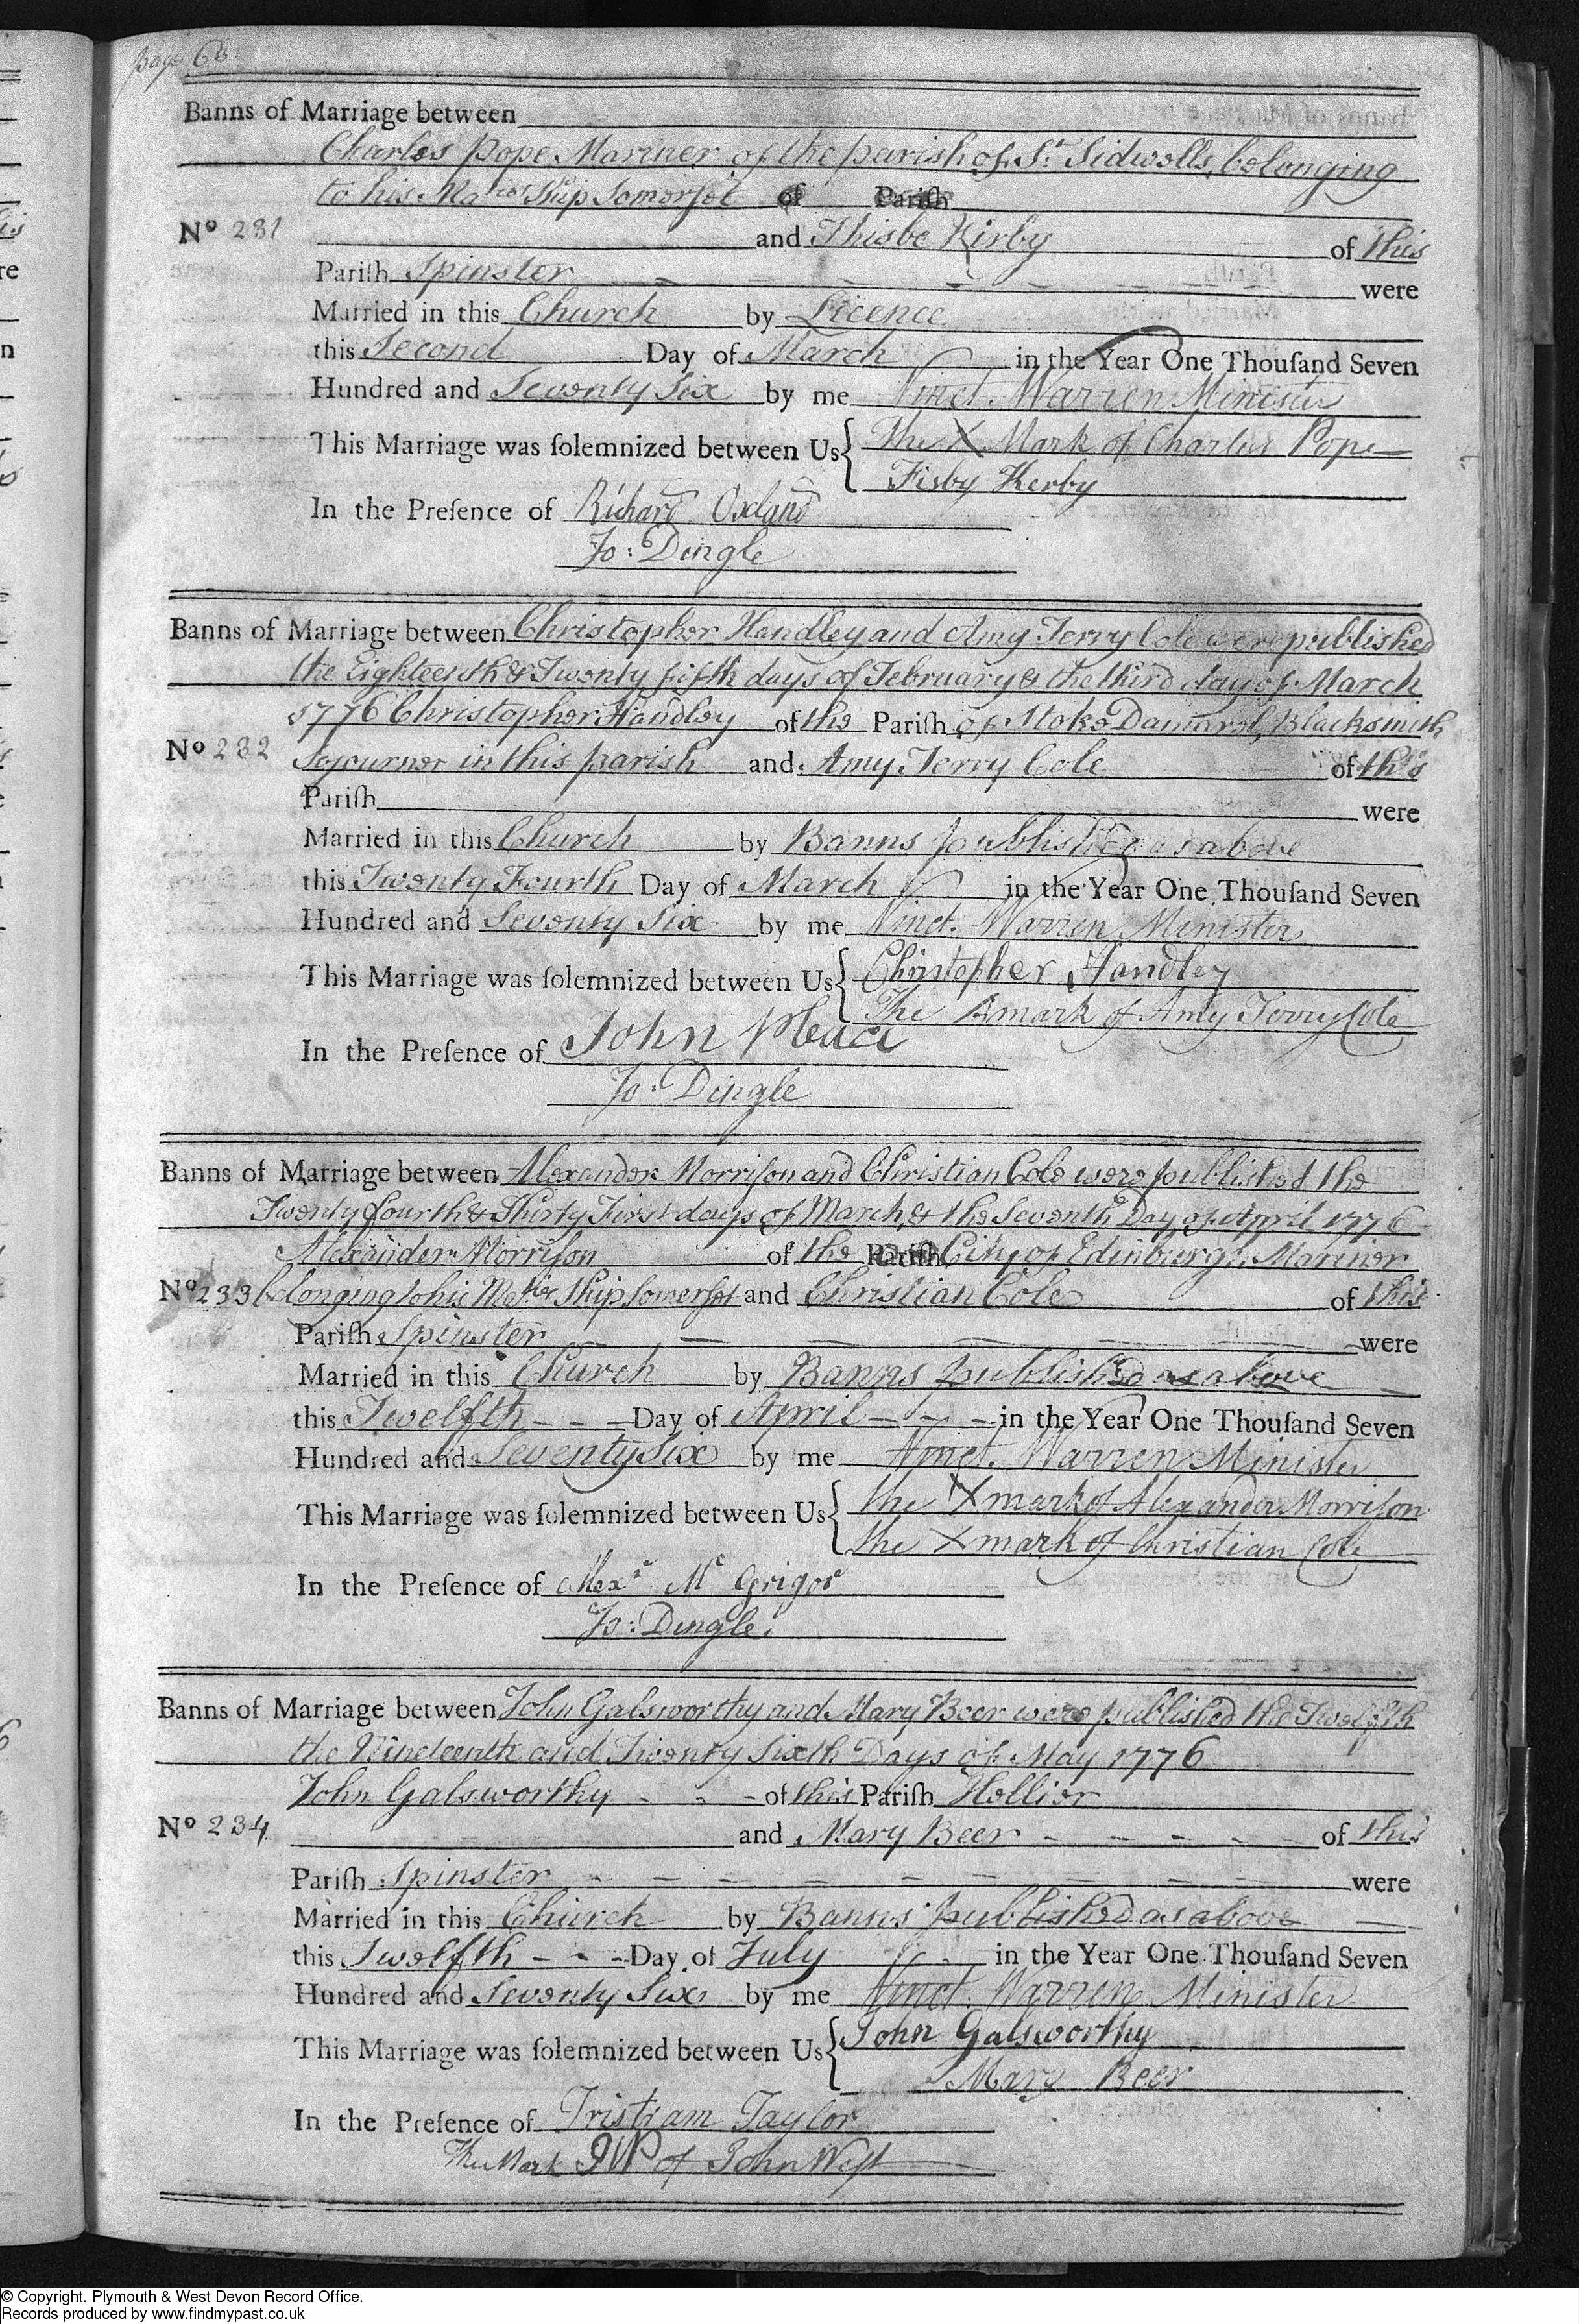 C:\Users\Virginia Rundle\Documents\Ancestry\Northey Moar Files\Galsworthy\Marriage of John Galsworthy and Mary Beer 1776.jpg